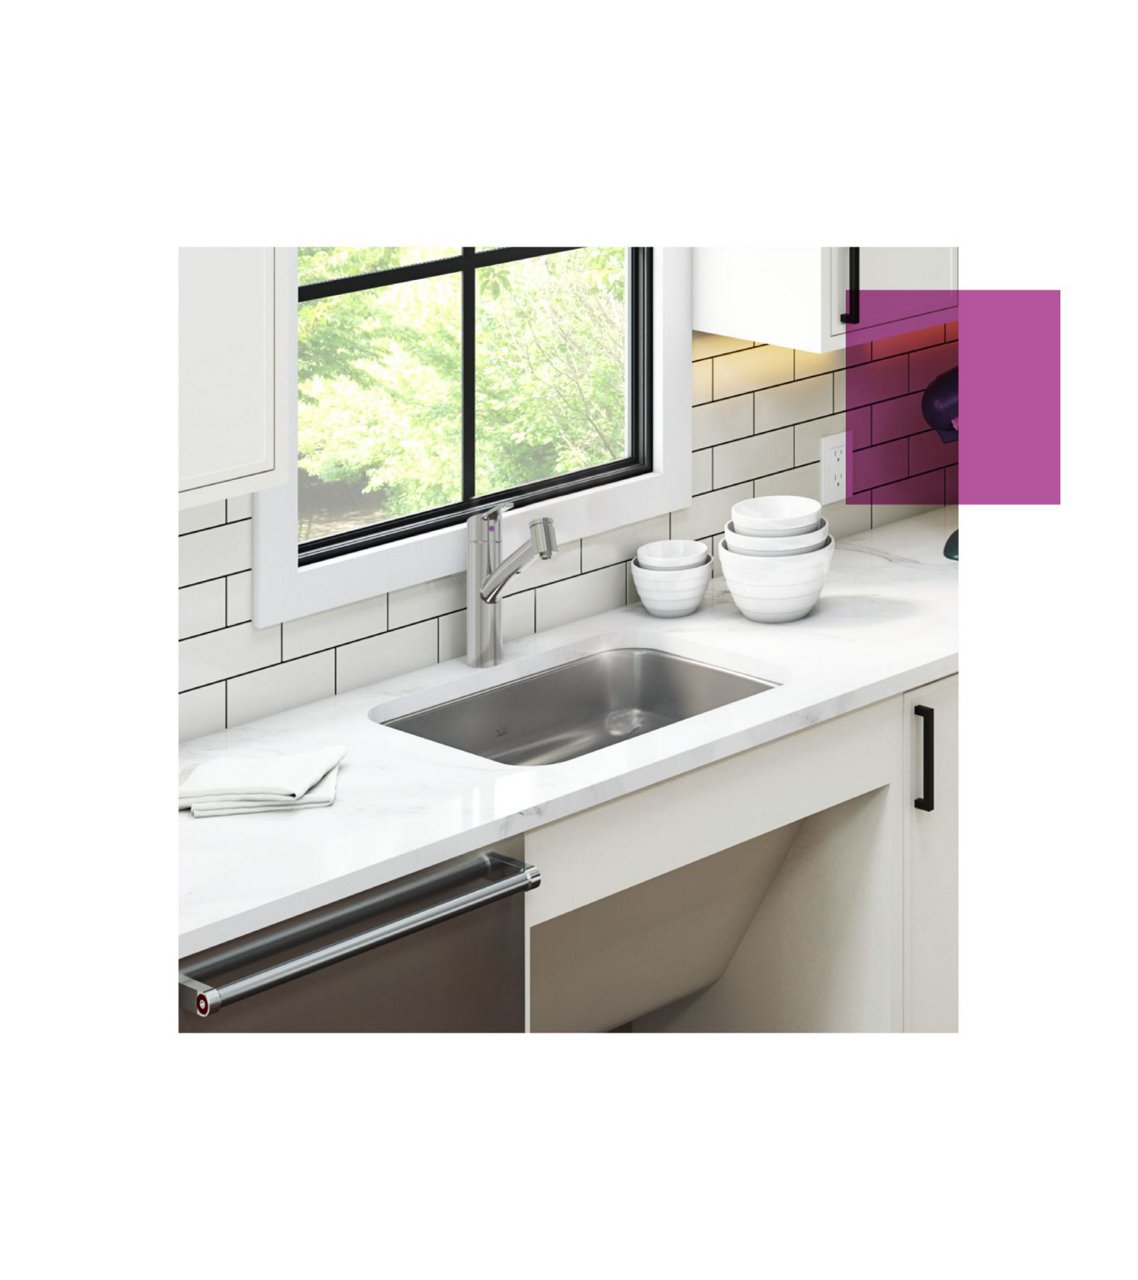 ADA kitchen sink in white cabinets with pull out kitchen faucet